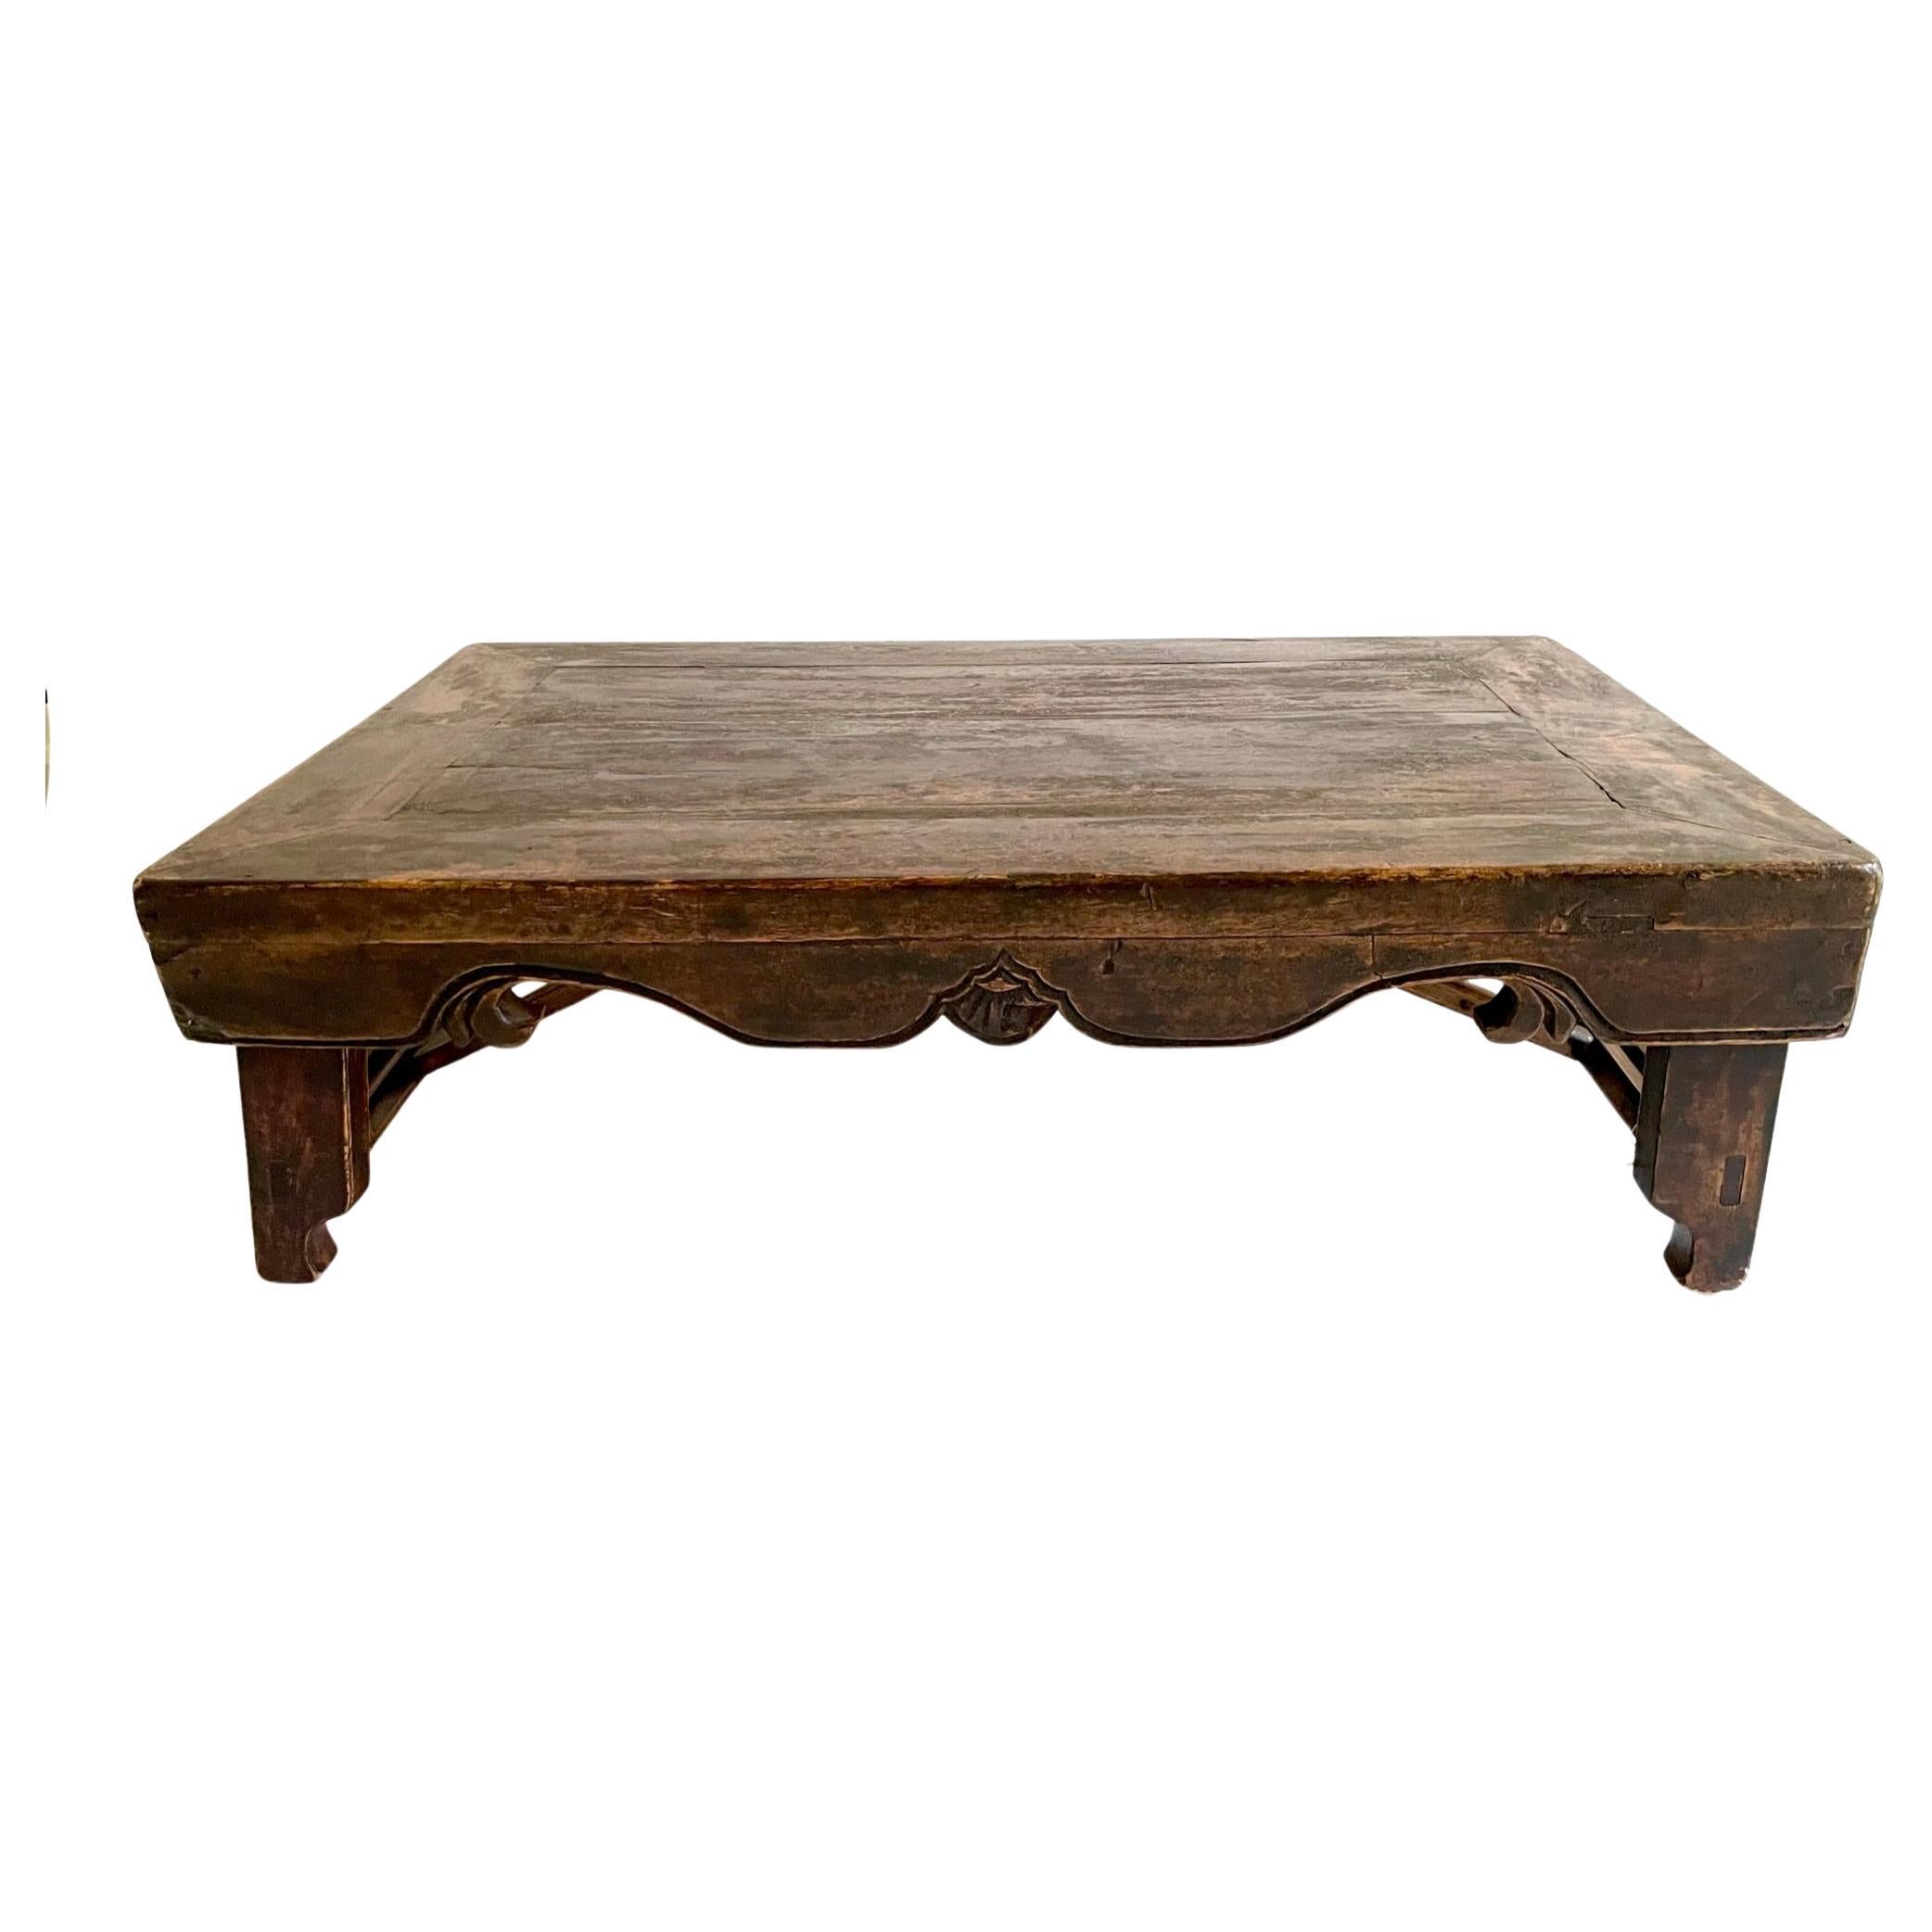 Rare 19th Century Chinese Folding Low Table 'Kang Table' For Sale